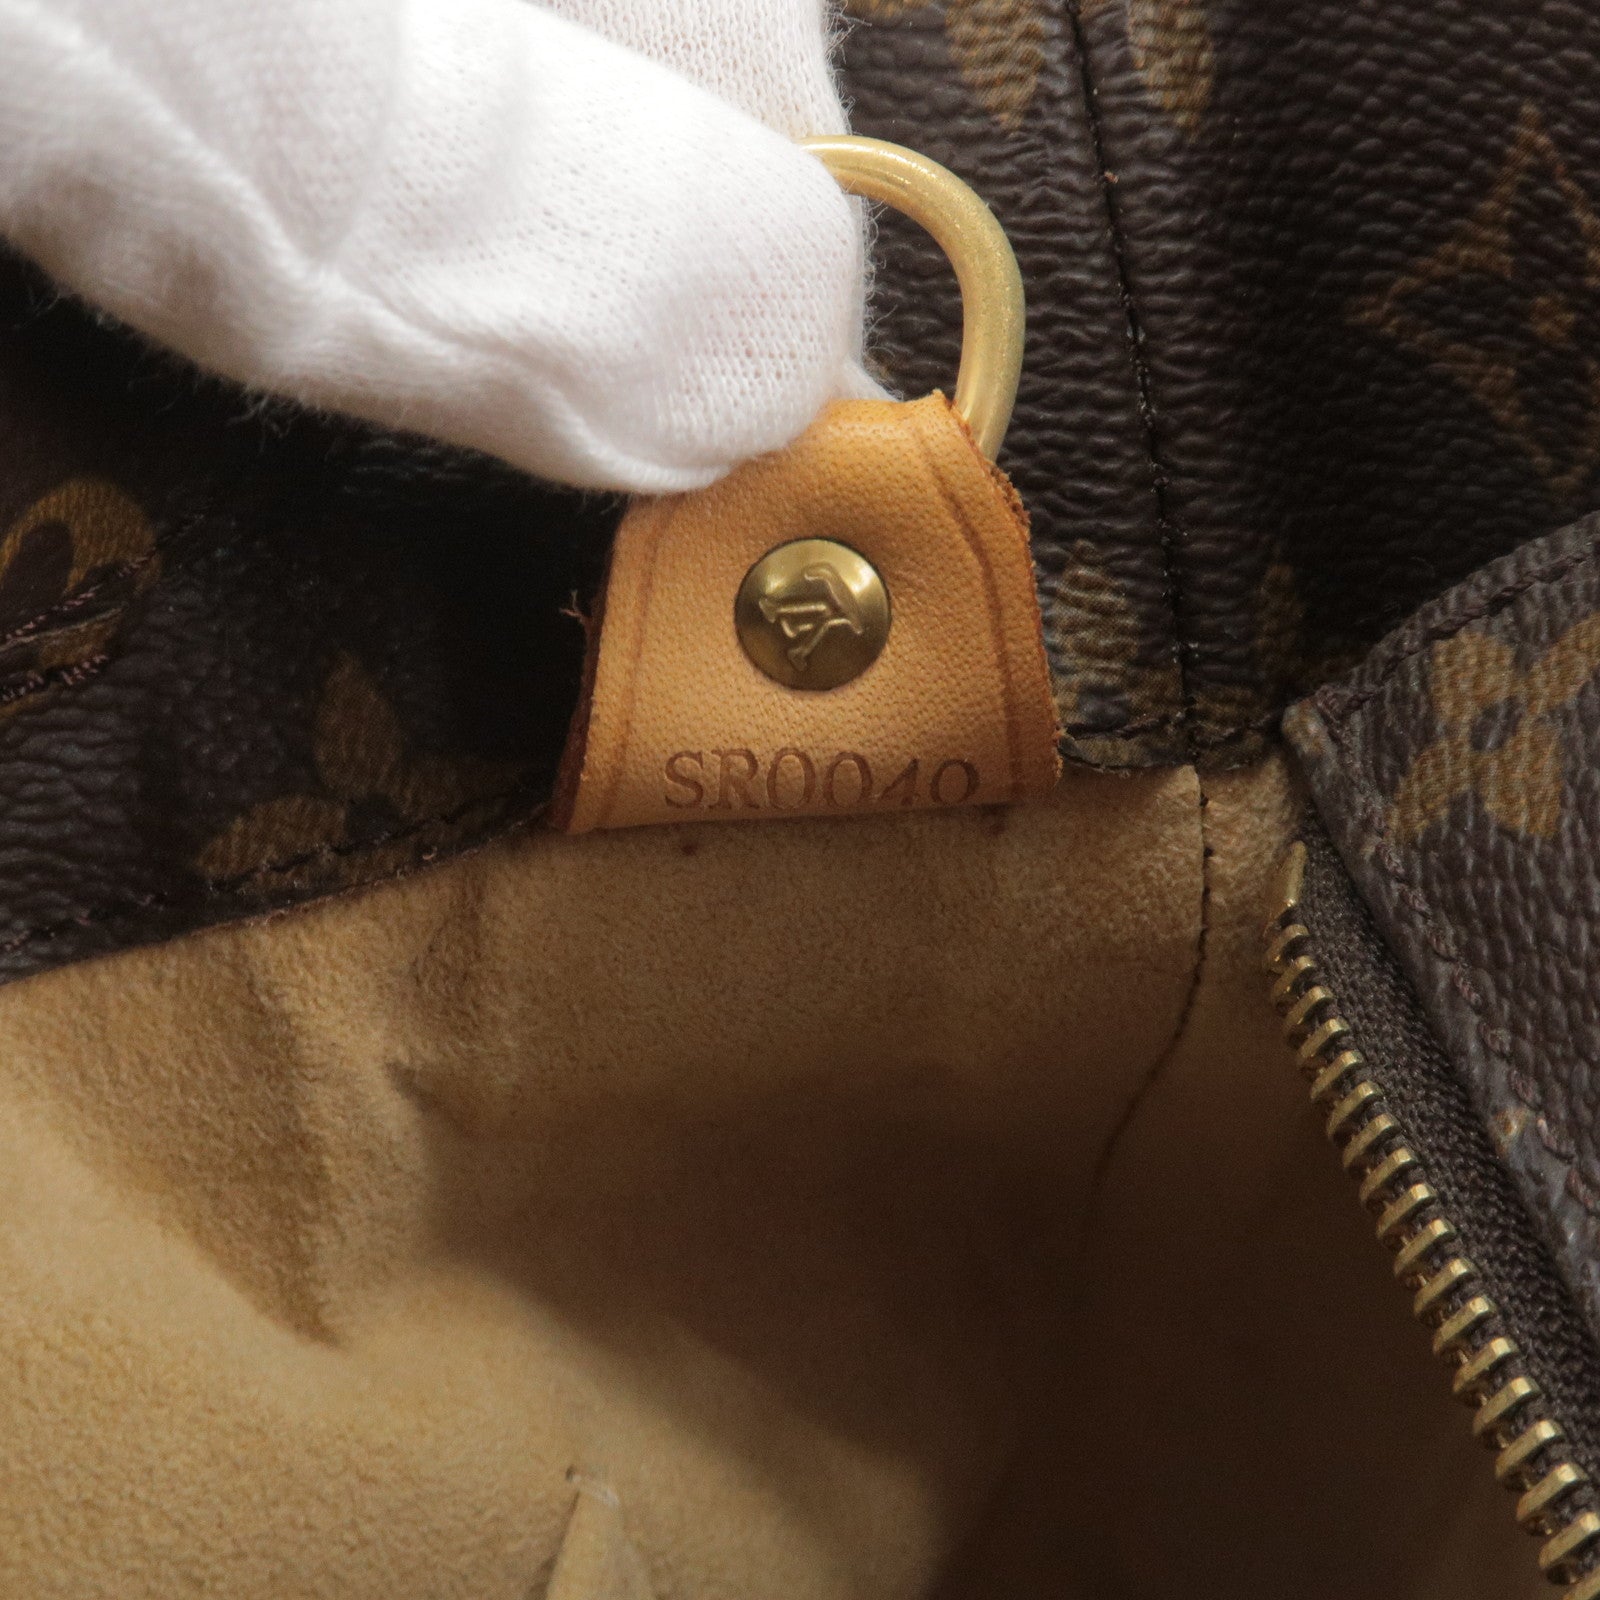 Retired Louis Vuitton Luco Tote - Review and What Fits Inside 